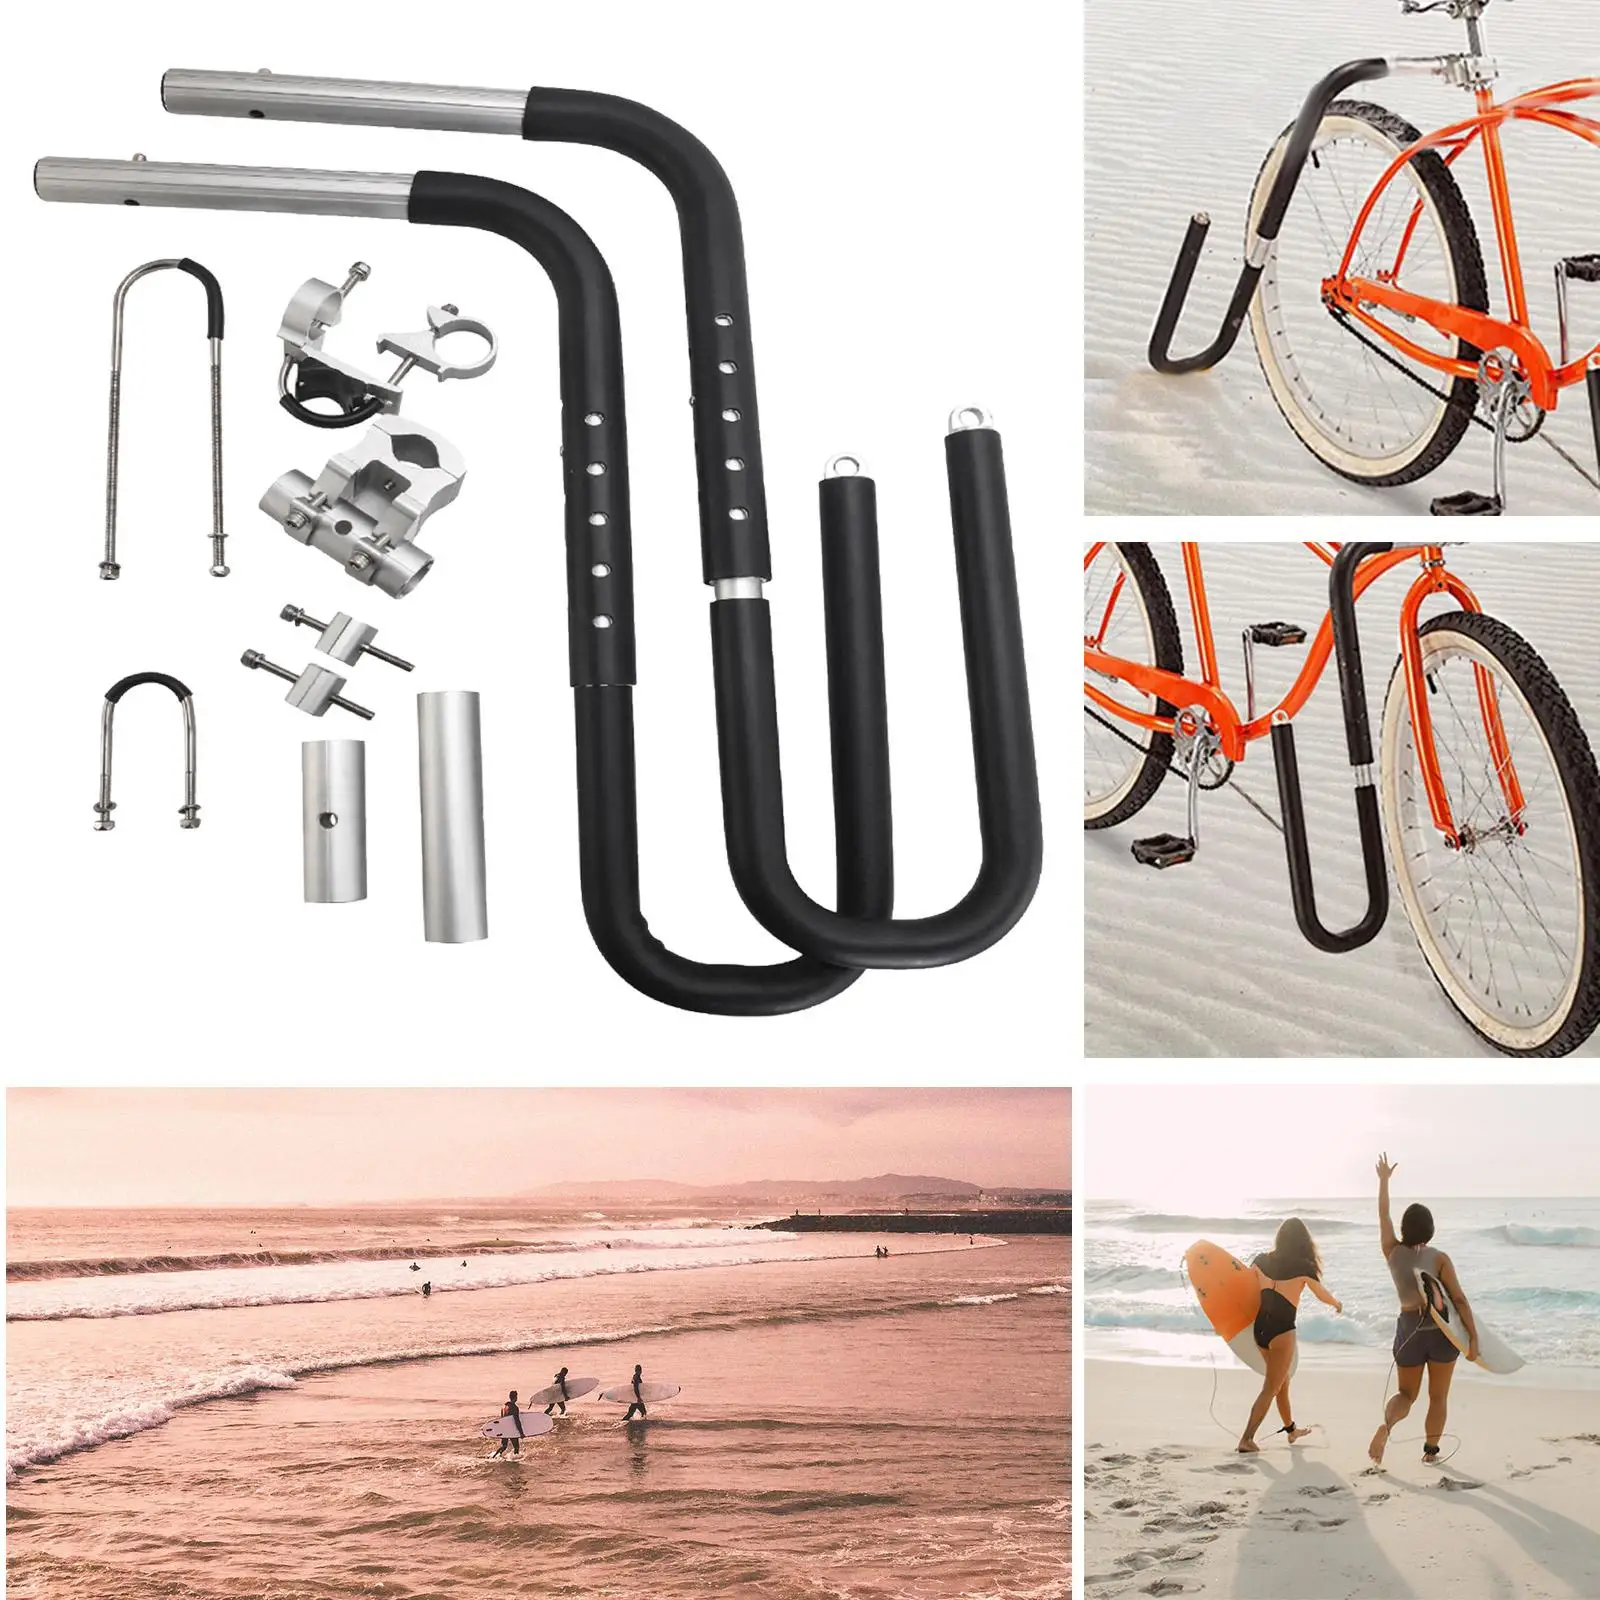 Universal Motorcycle Surfboard Carrying Holder Frame Portable Bicycle Surfing Board Wakeboard Carrier Mount Racks Accessories